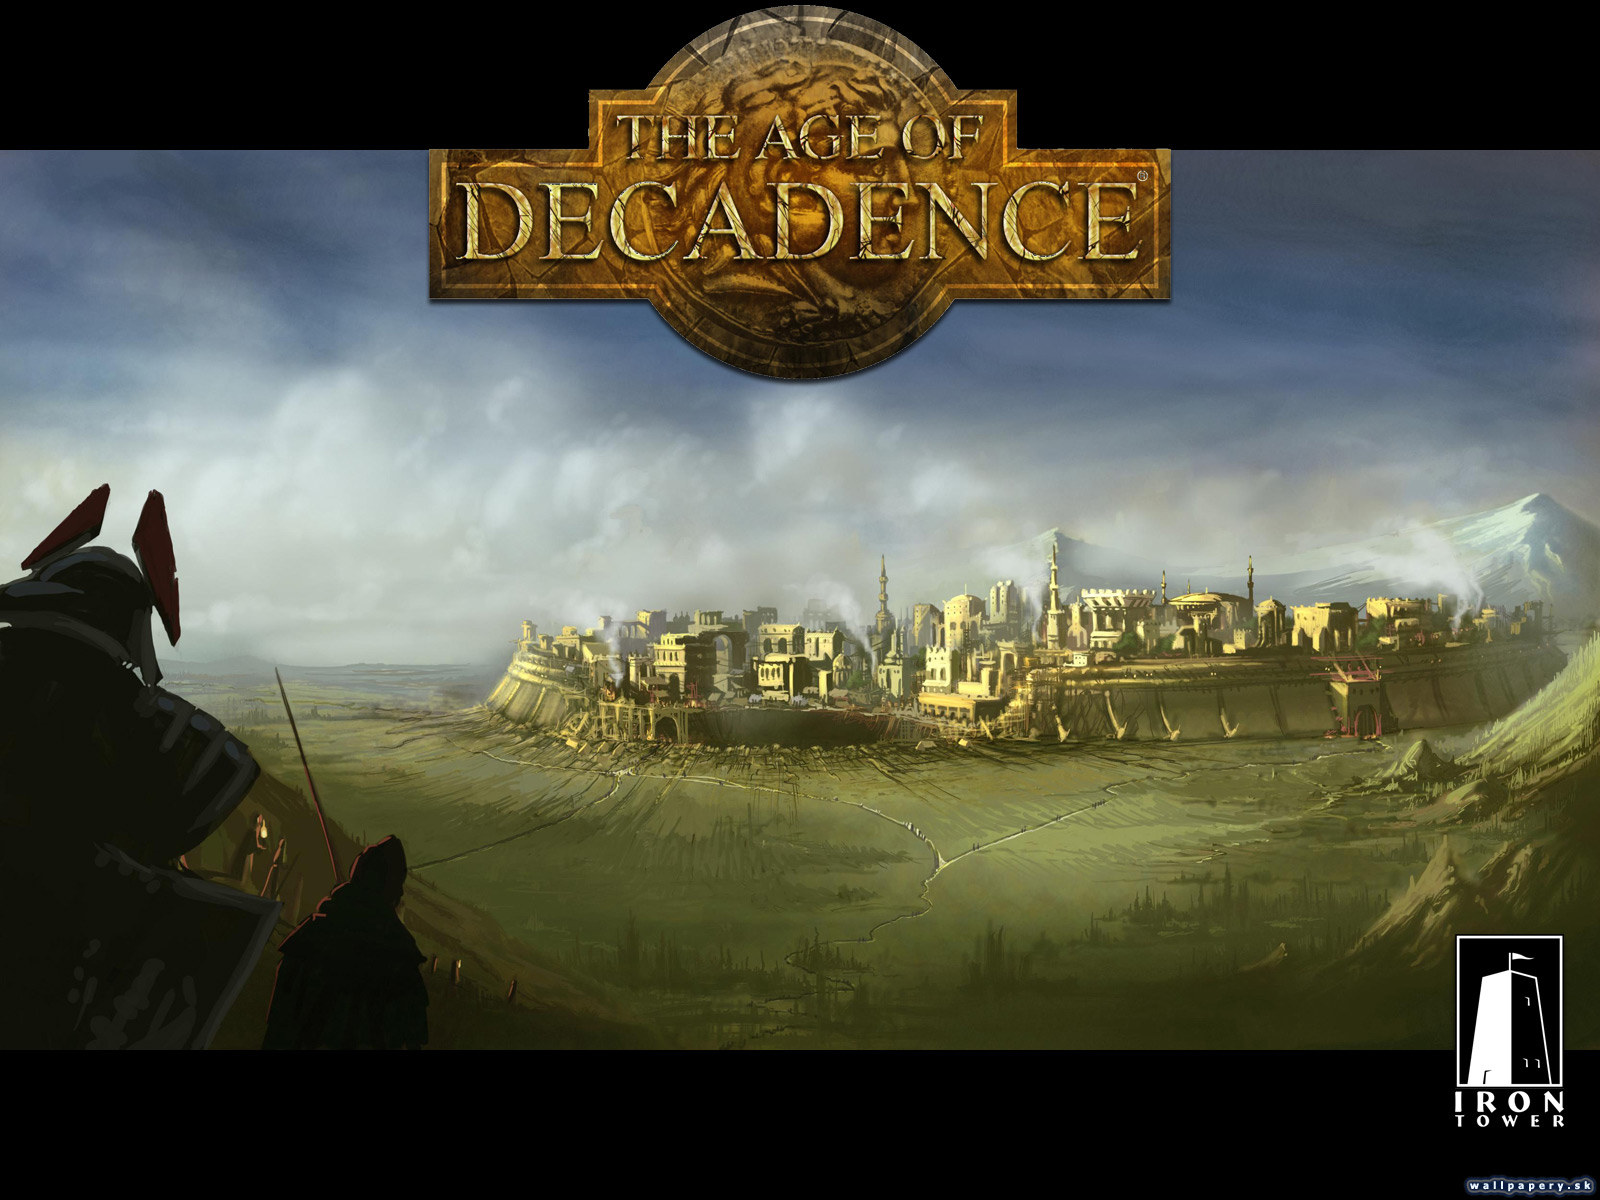 The Age of Decadence - wallpaper 3